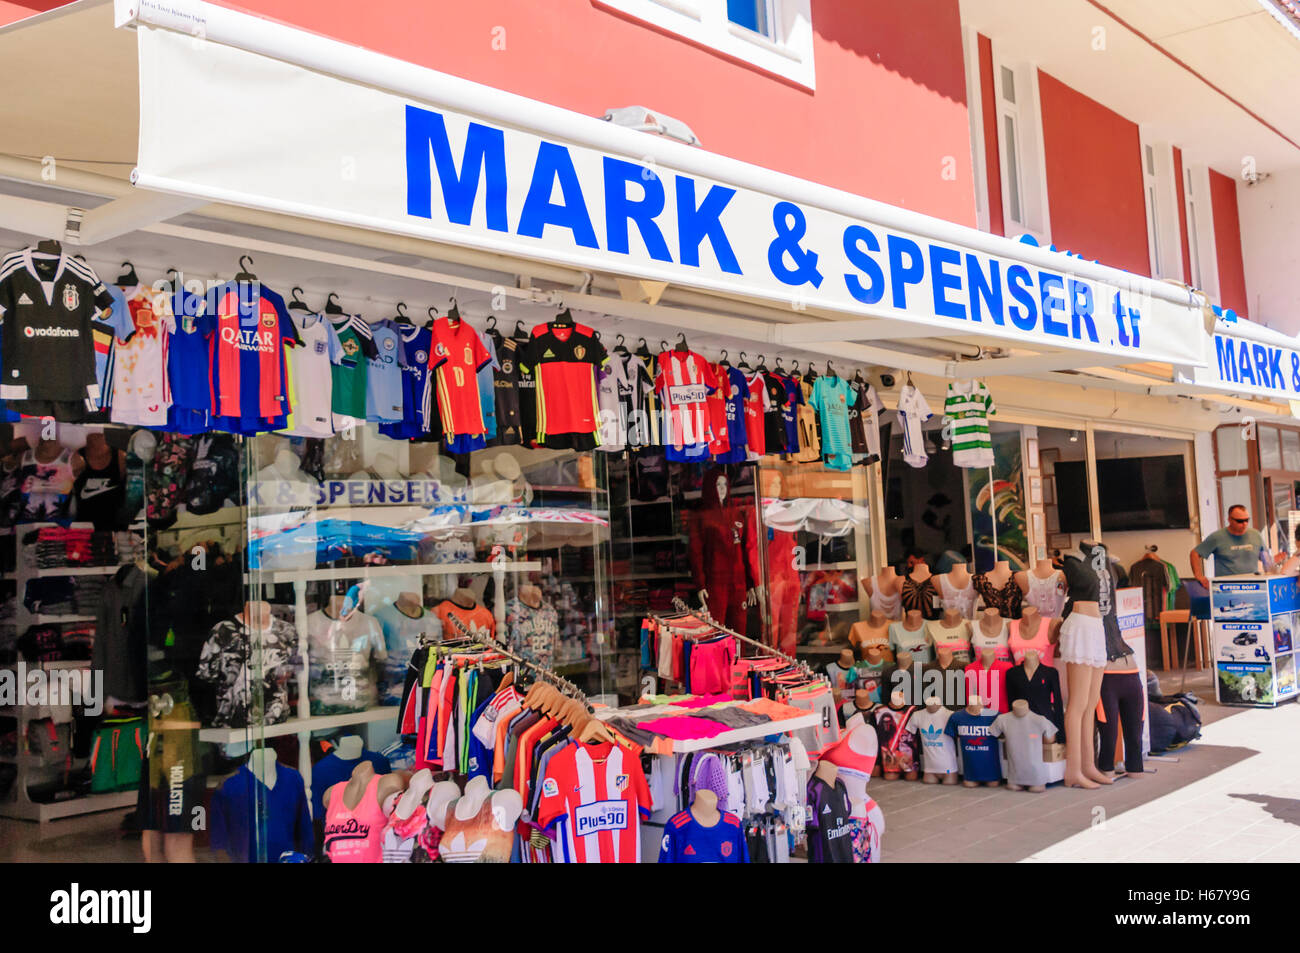 Clothese shop selling counterfeit goods calling itself Mark & Spenser in Turkey. Stock Photo